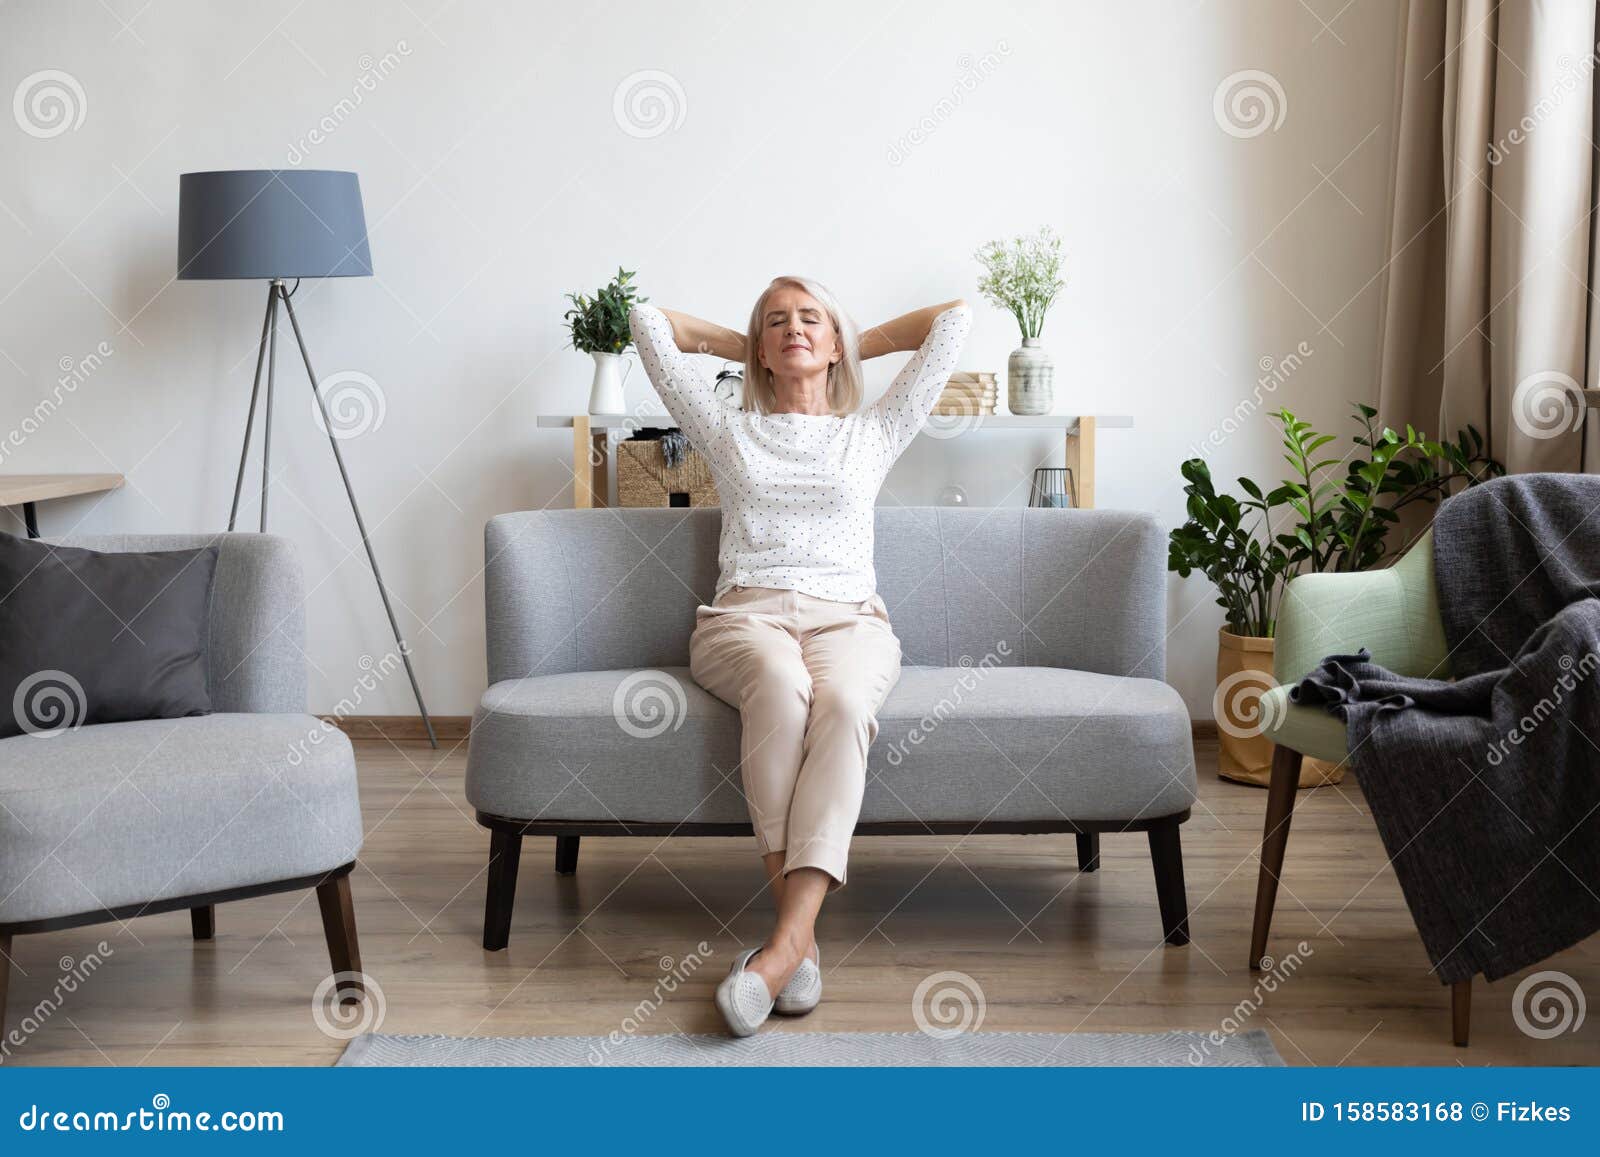 Calm Older Mature Woman Relaxing On Comfortable Sofa At Home Stock